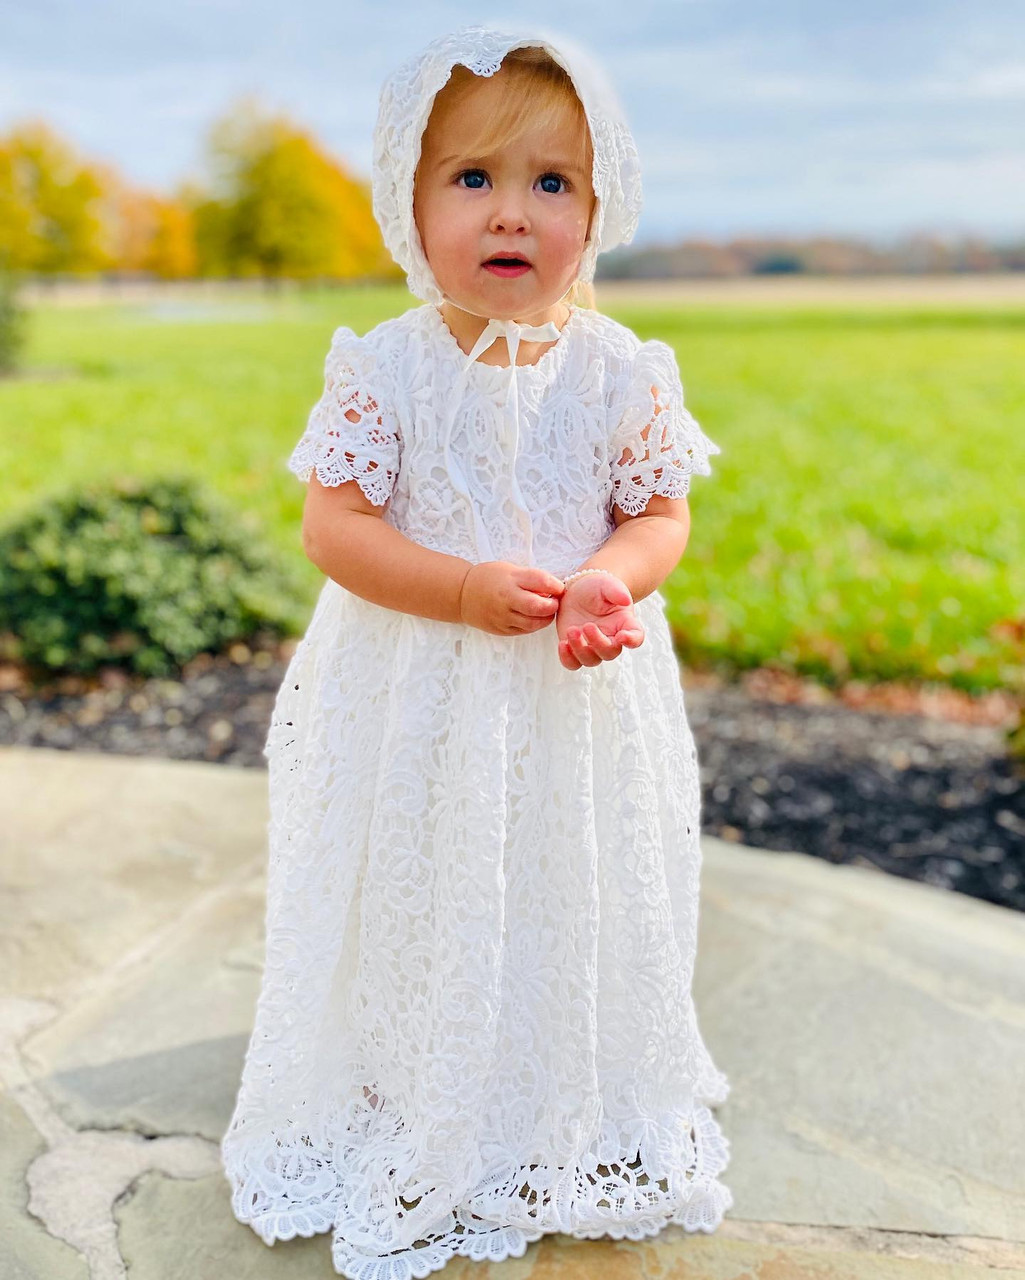 Christening Gown for Baby Girls with Horsehair Layered Skirt | Buy Christening  Gowns for Sale in Rhode Island -Christening-Gowns.net